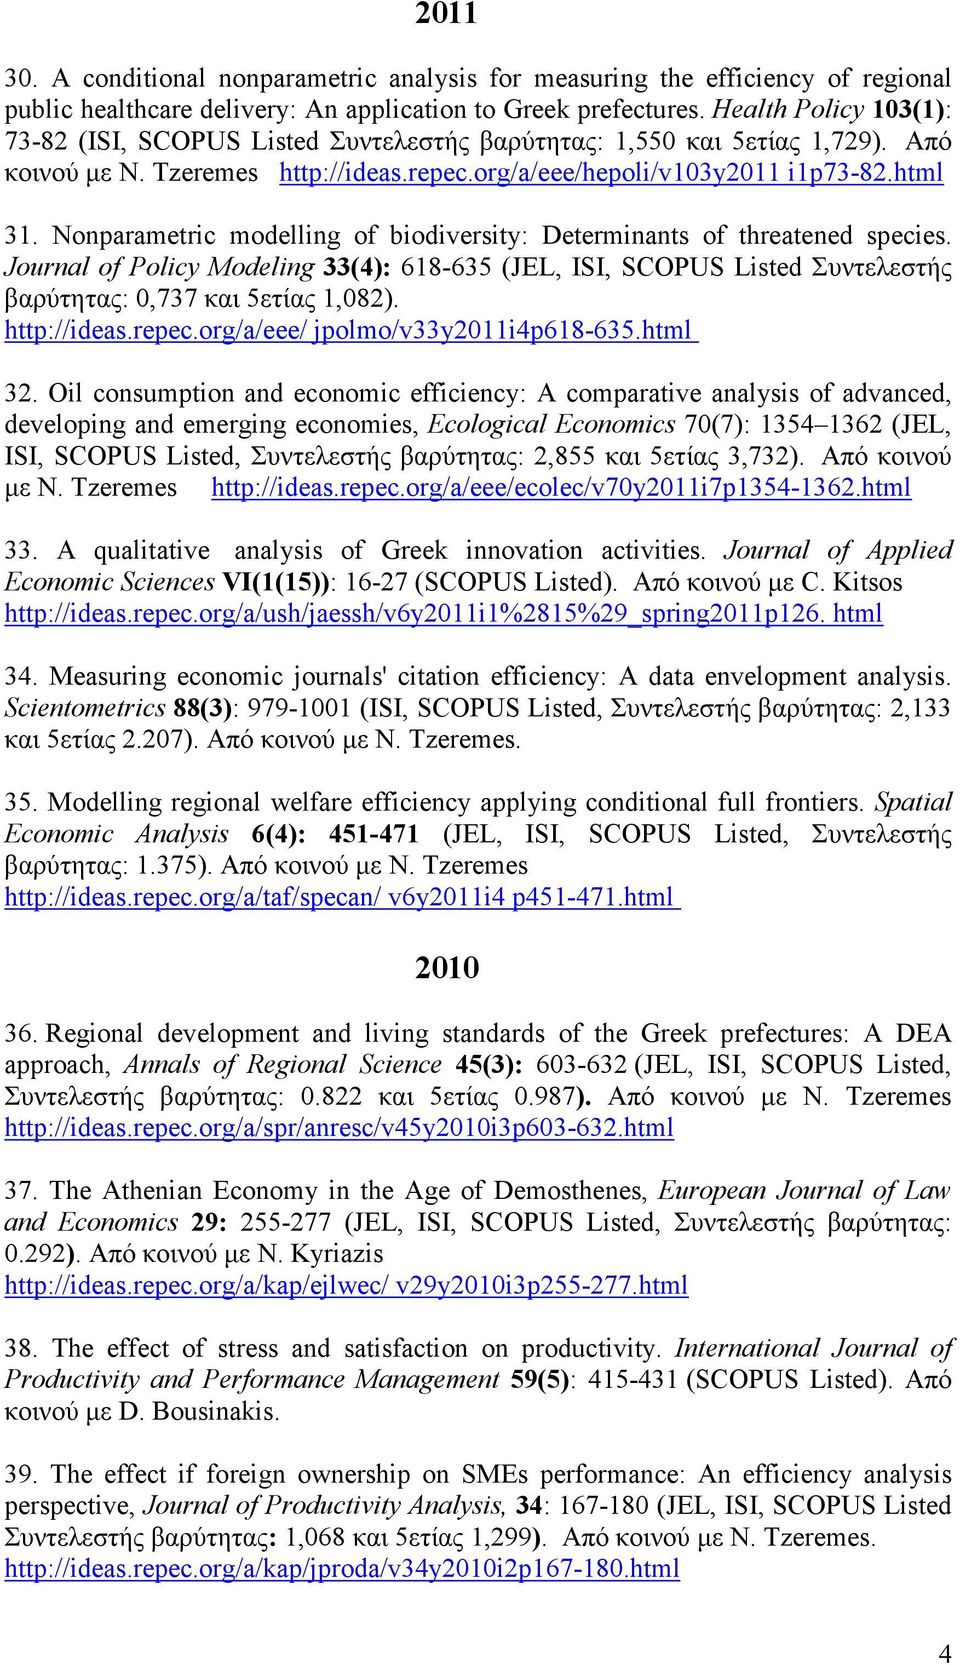 Nonparametric modelling of biodiversity: Determinants of threatened species. Journal of Policy Modeling 33(4): 618-635 (JEL, ISI, SCOPUS Listed Συντελεστής βαρύτητας: 0,737 και 5ετίας 1,082).